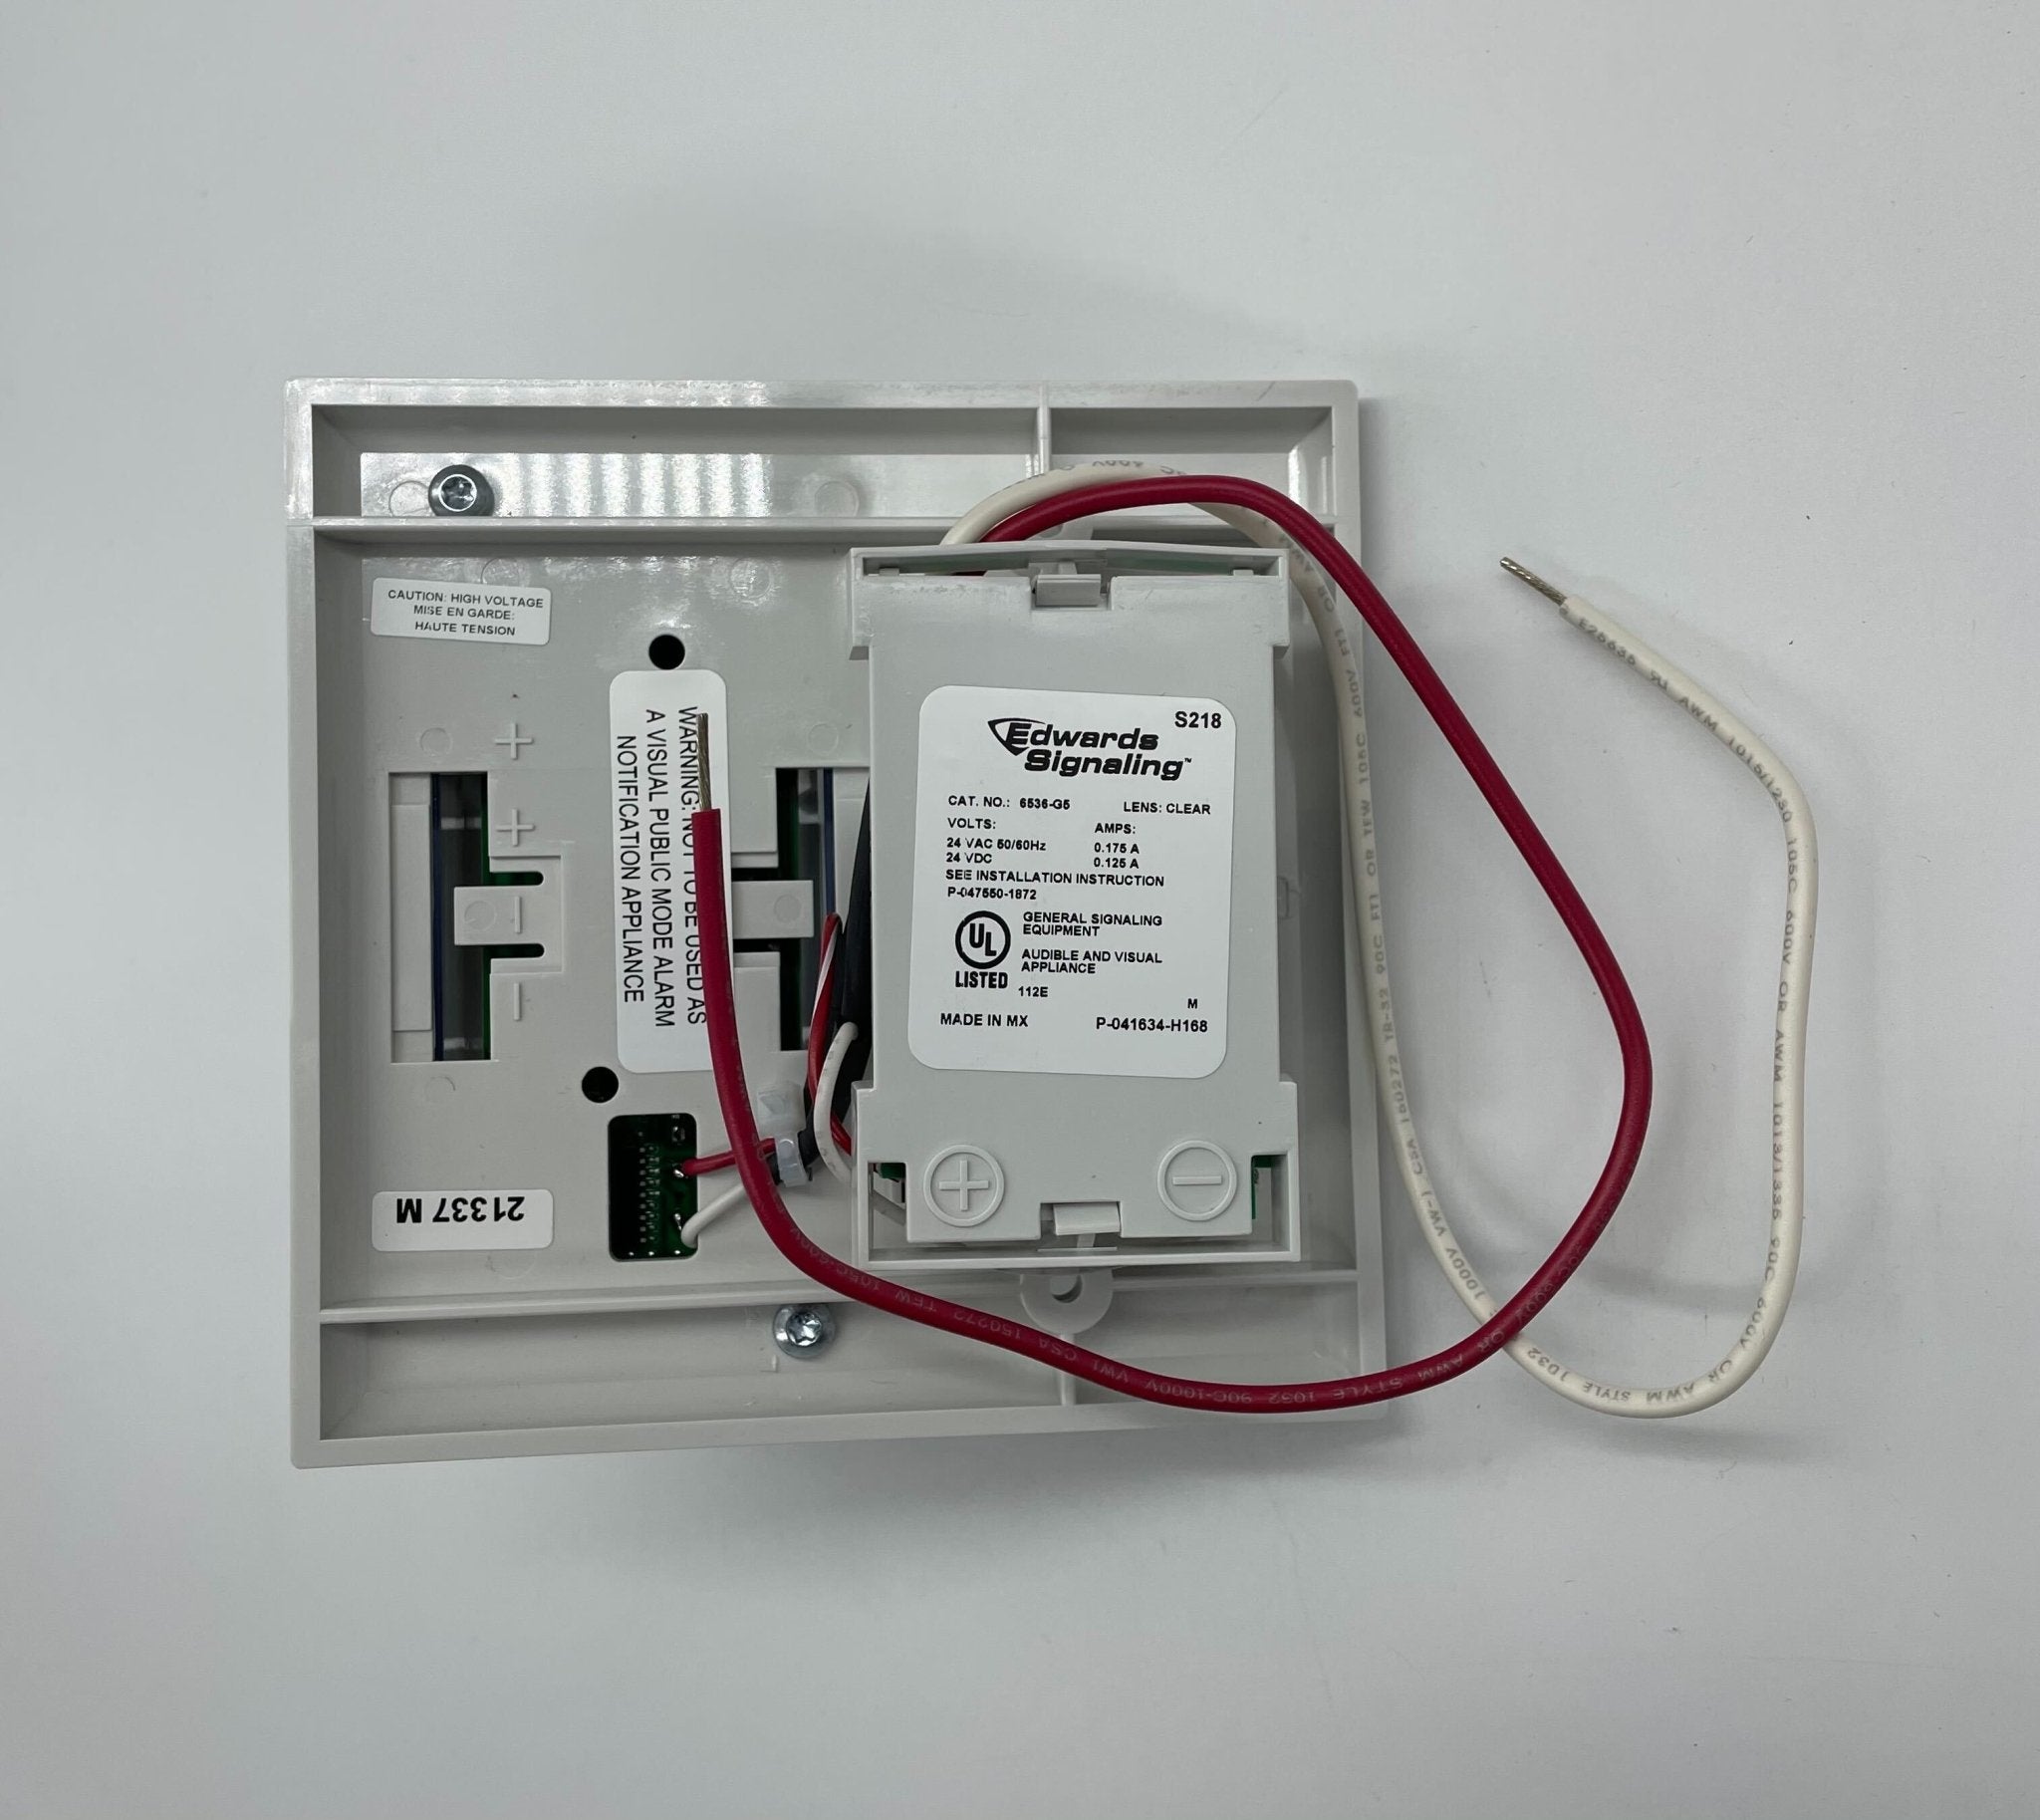 Edwards 6538-G5 - The Fire Alarm Supplier